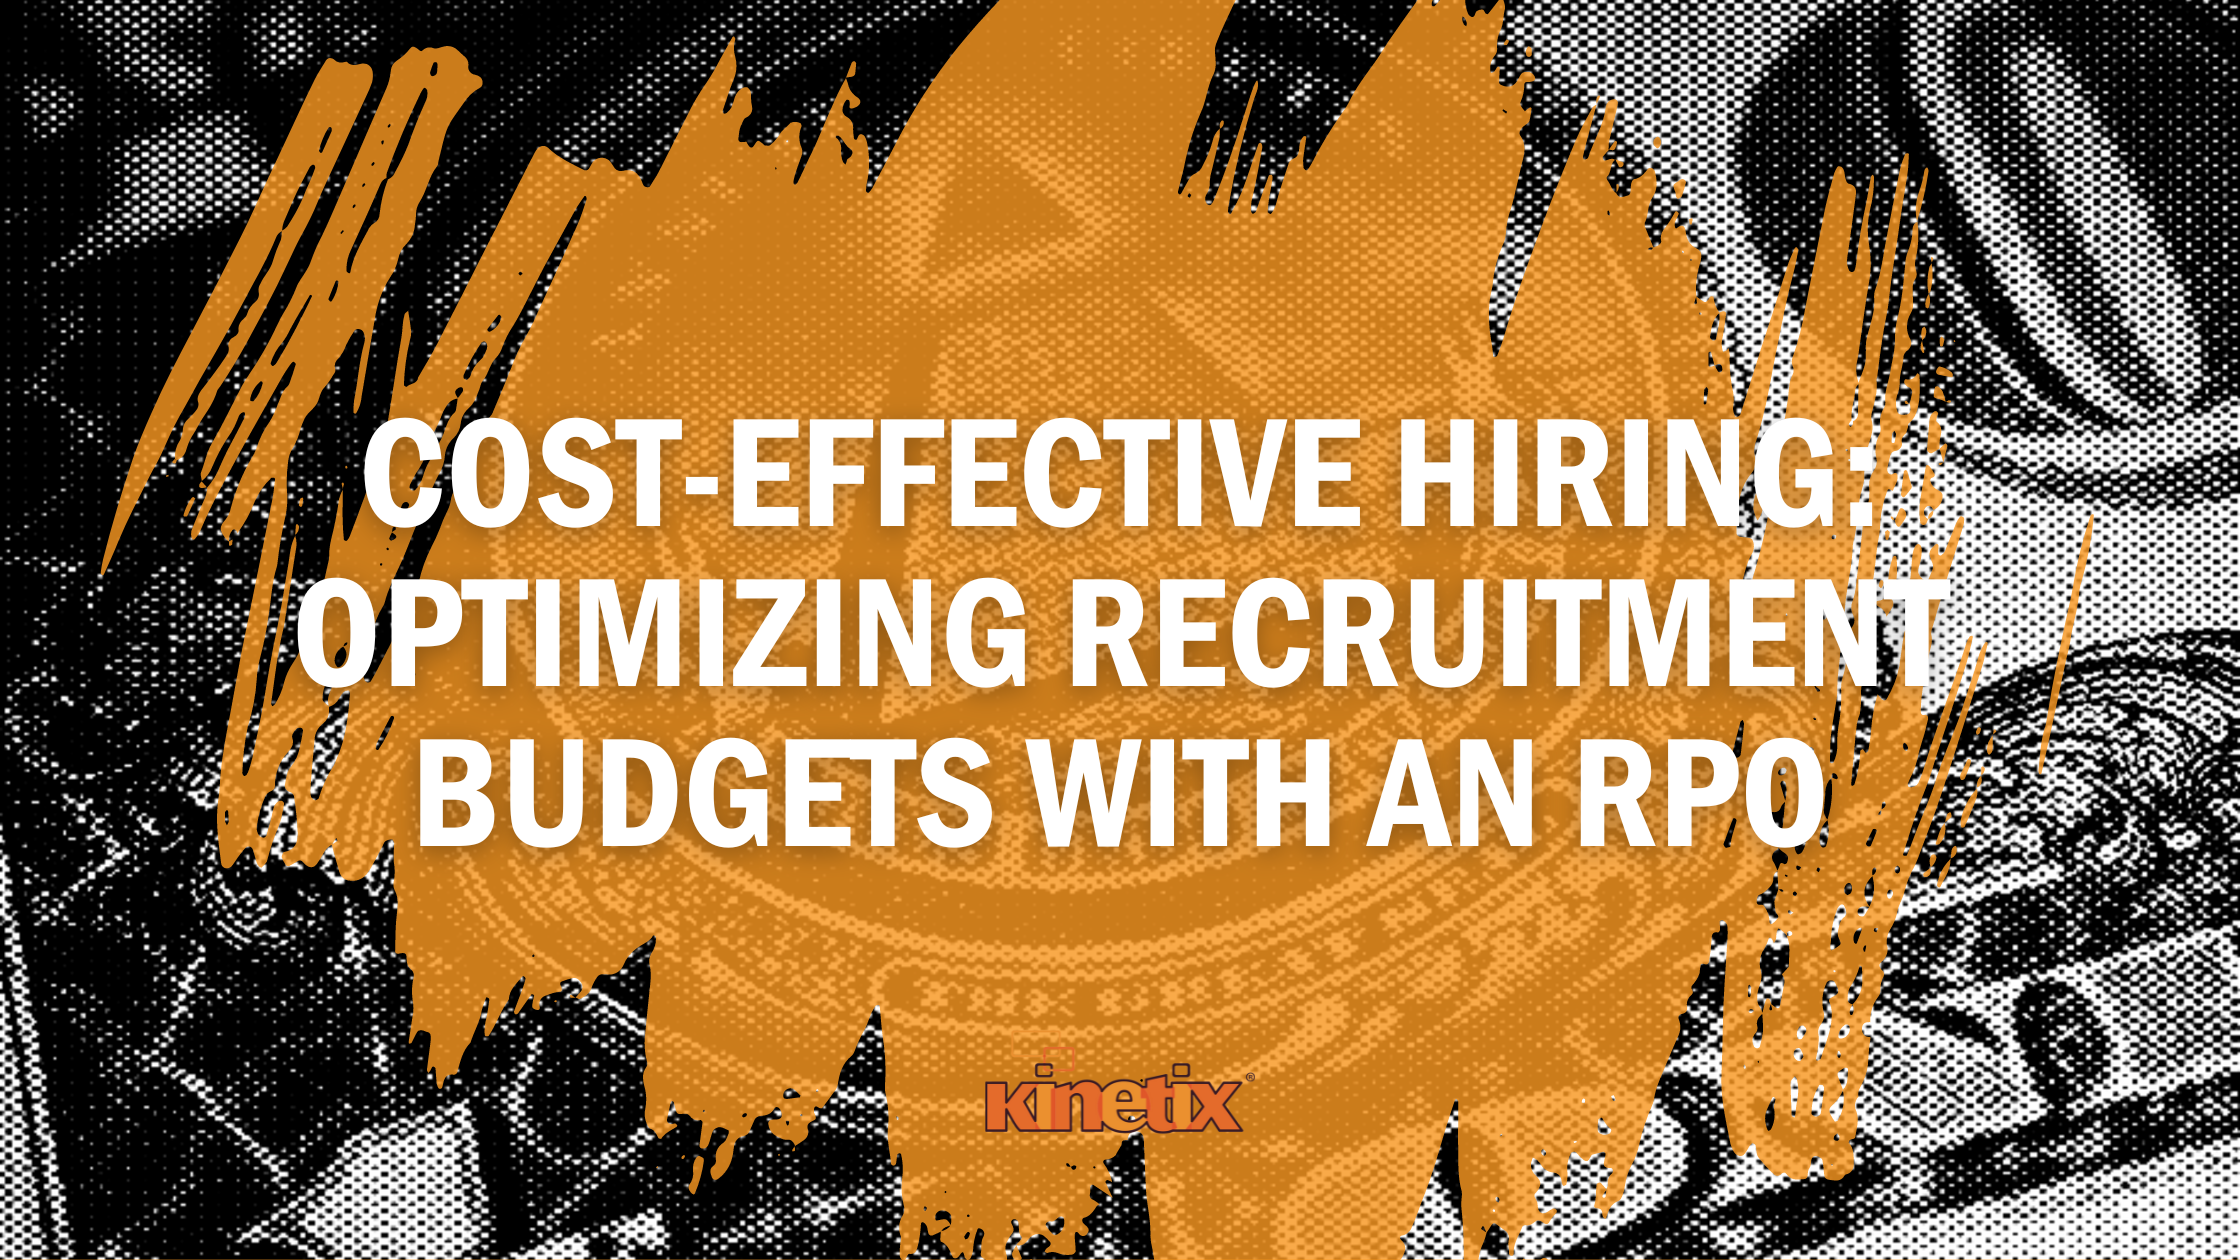 Cost-Effective Hiring Optimizing Recruitment Budgets with an RPO